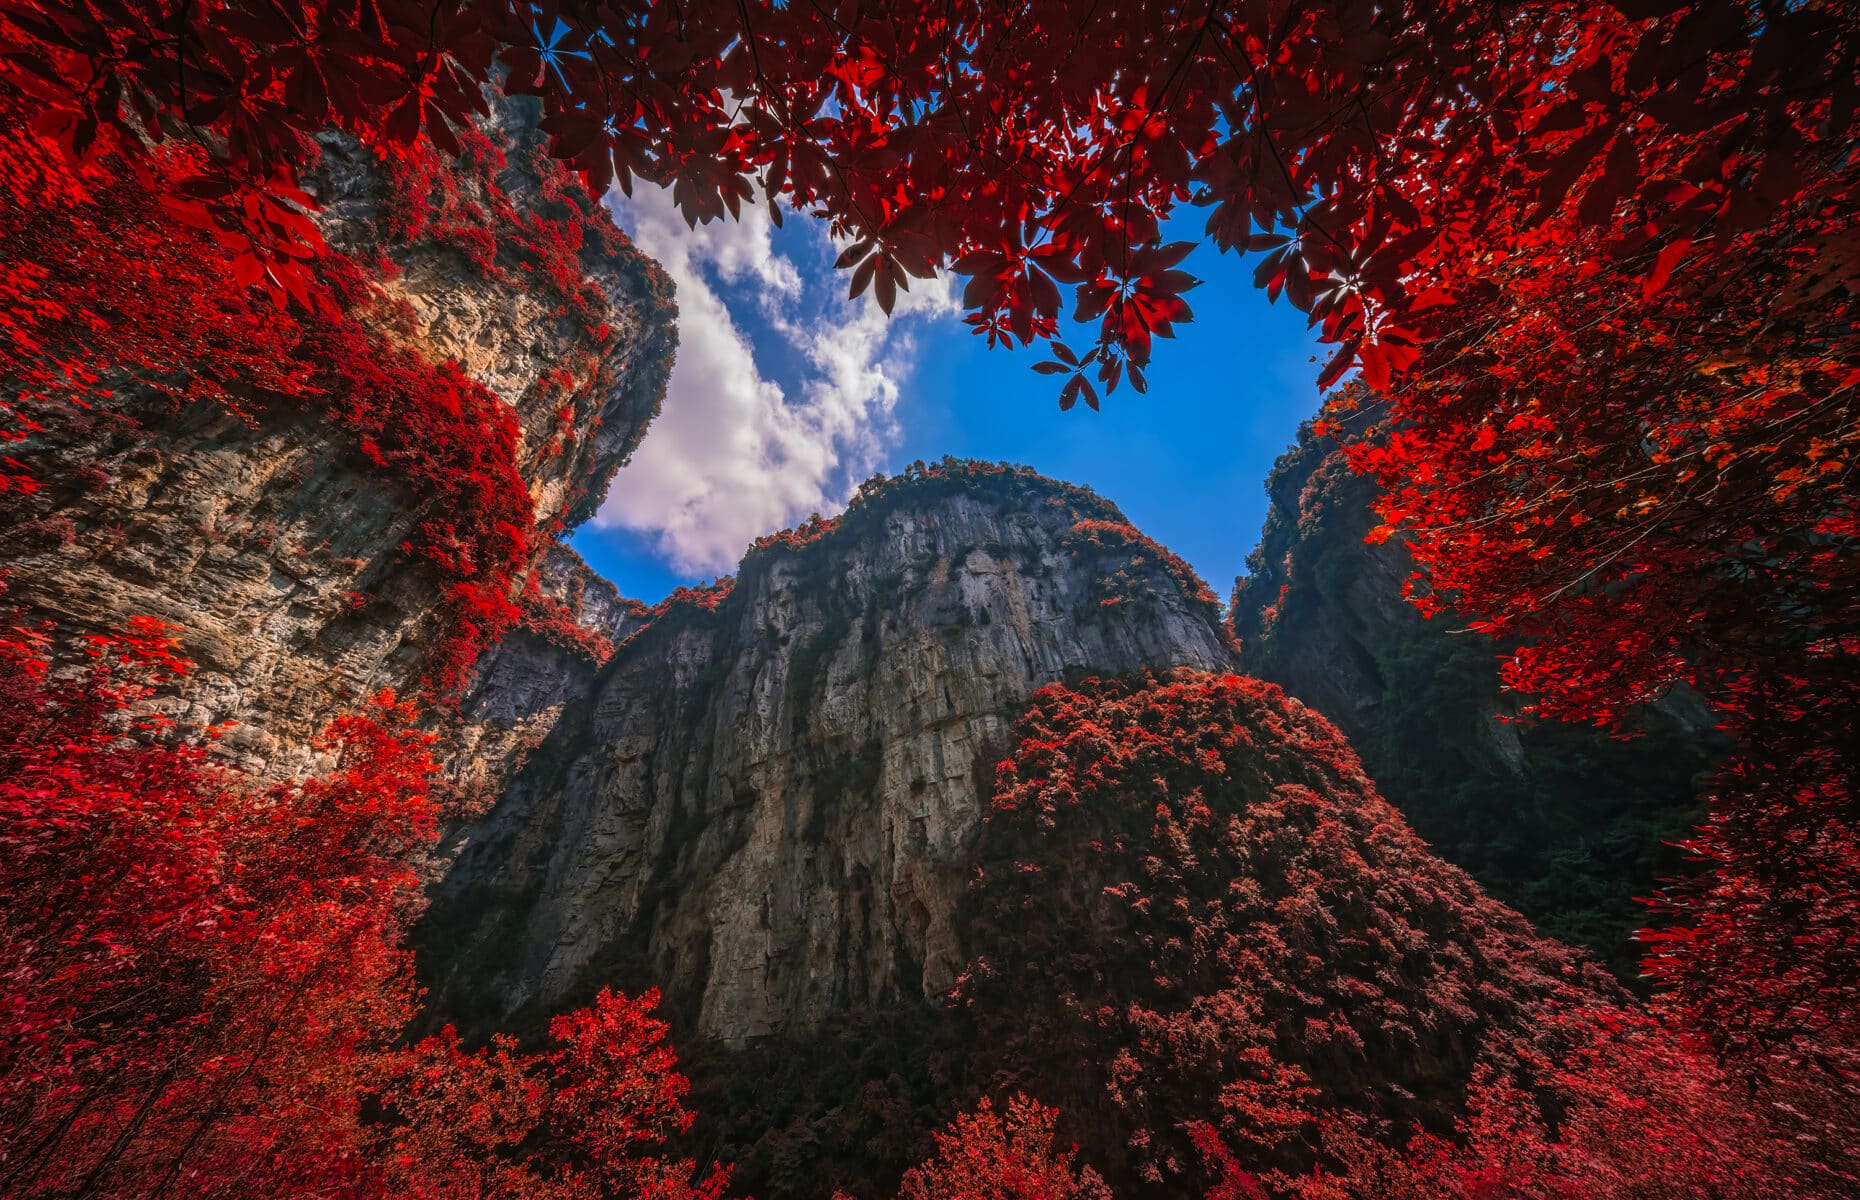 Autumn red leaves landscape of the massive vertical rock walls in Longshuixia Fissure National park, Wulong country, Chongqing, China